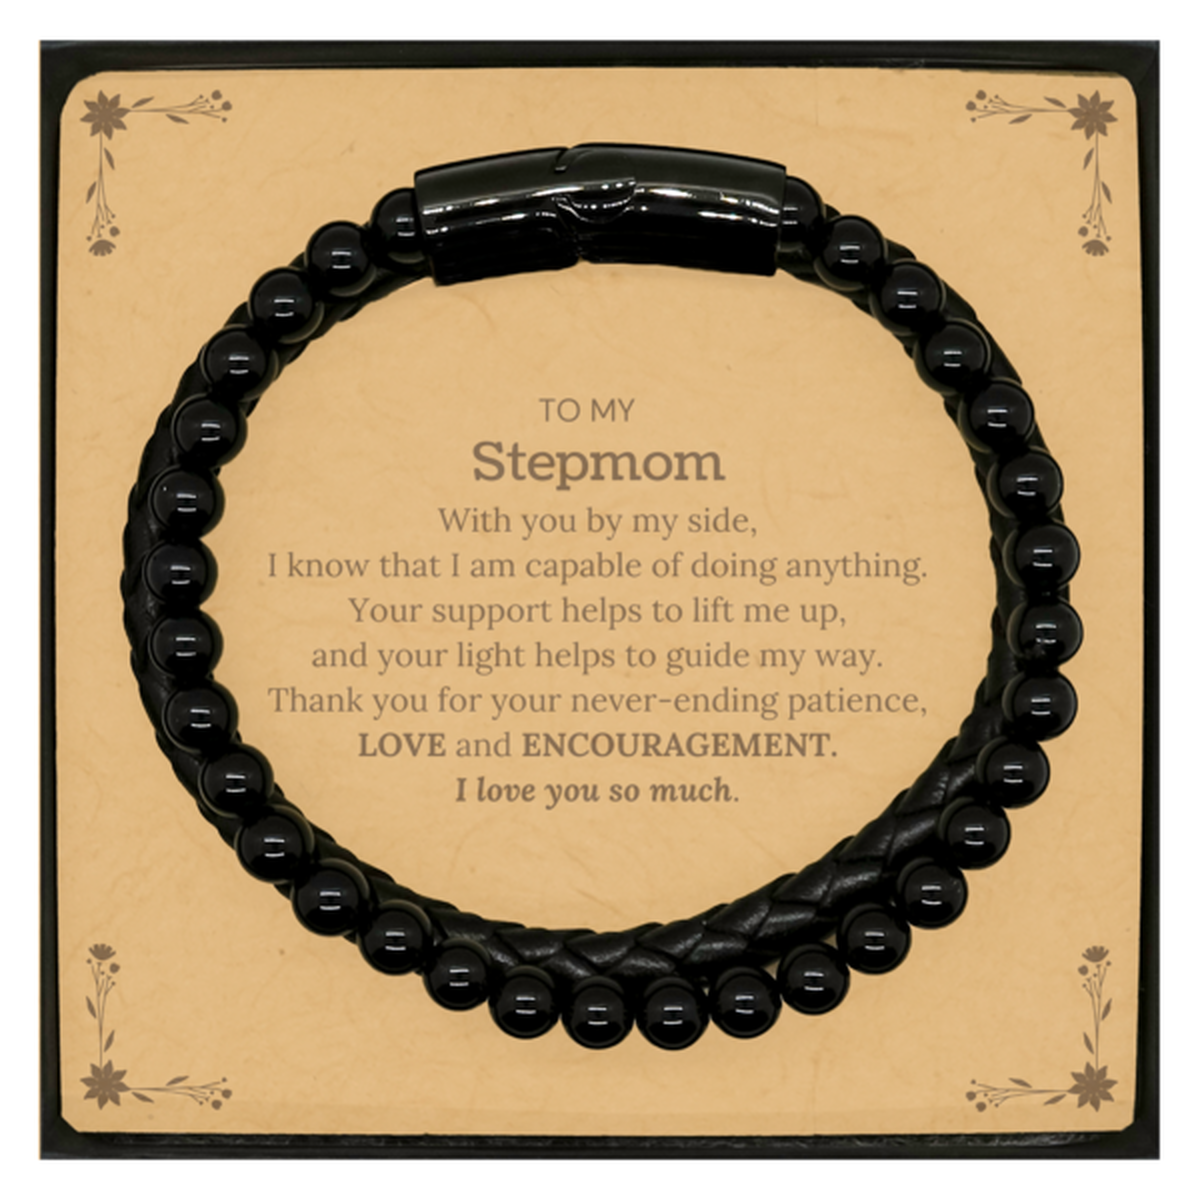 Appreciation Stepmom Stone Leather Bracelets Gifts, To My Stepmom Birthday Christmas Wedding Keepsake Gifts for Stepmom With you by my side, I know that I am capable of doing anything. I love you so much